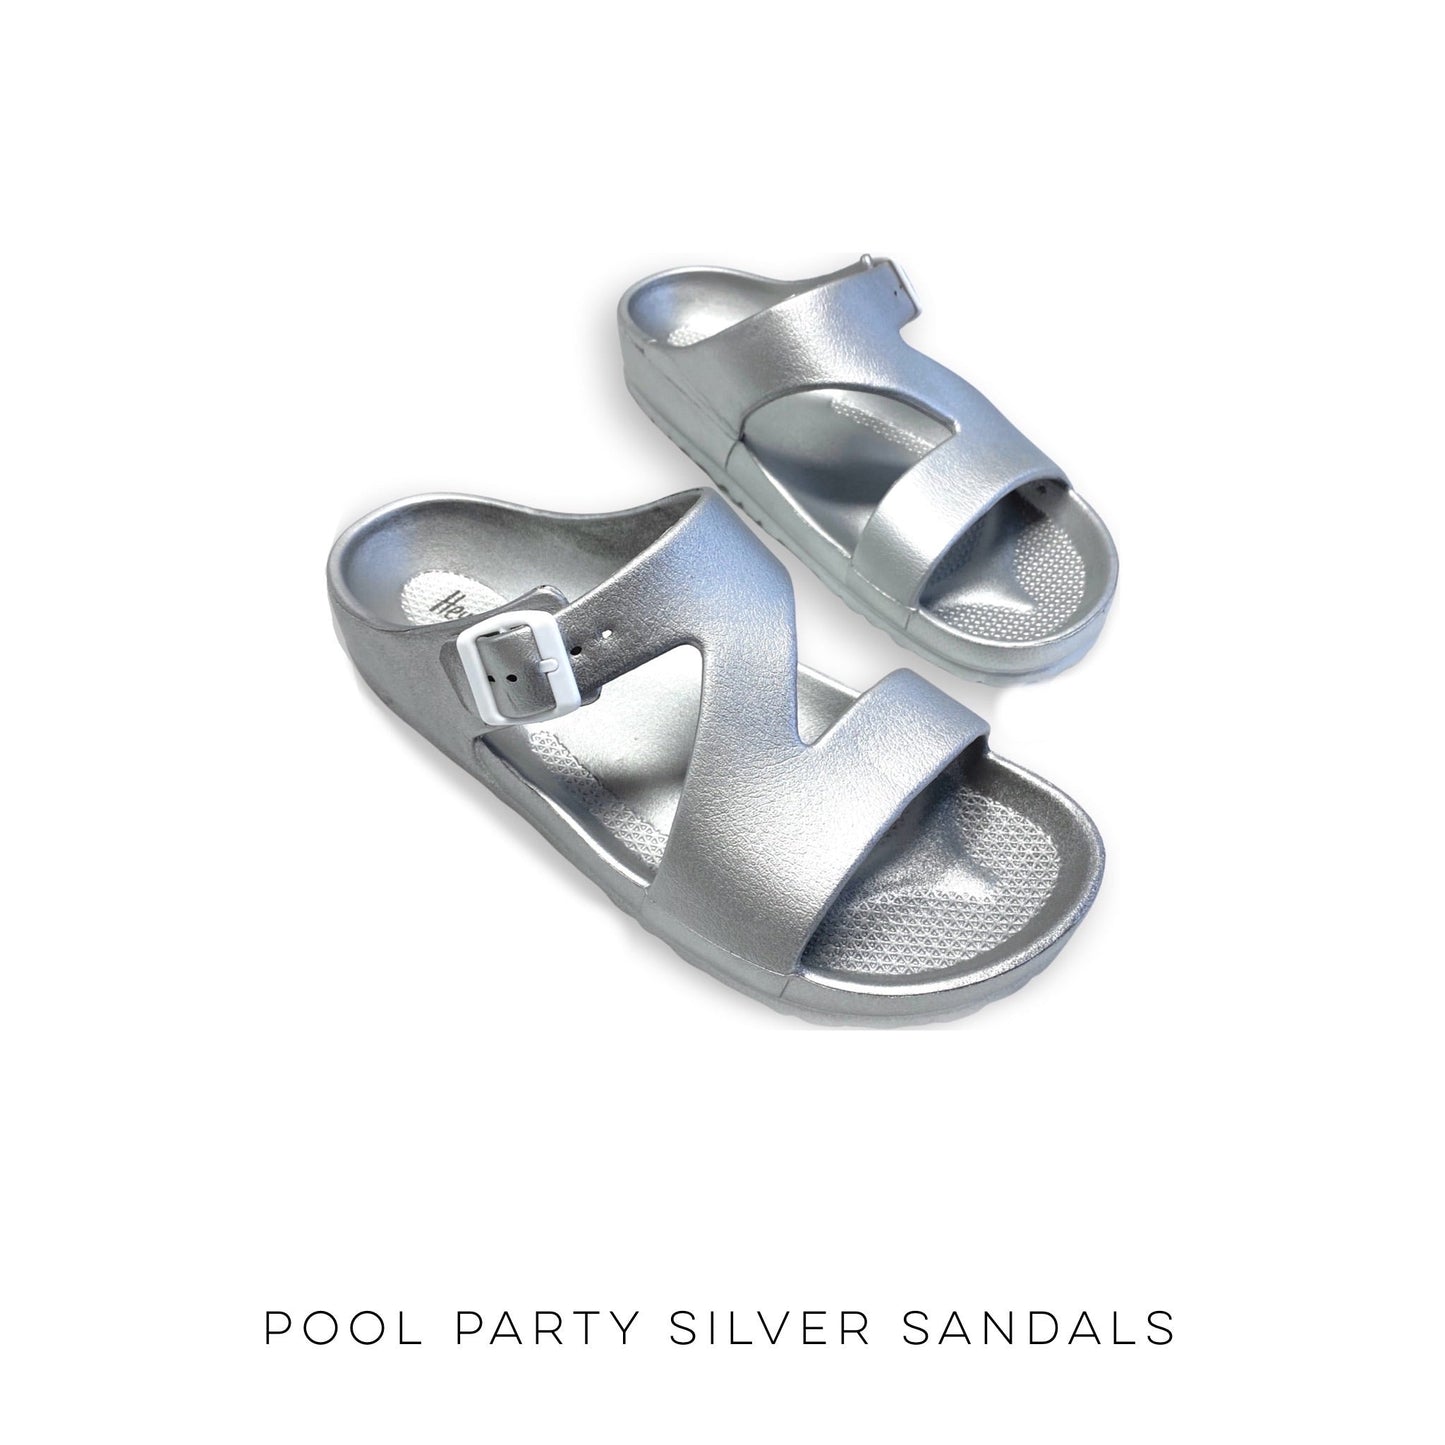 Pool Party Silver Sandals